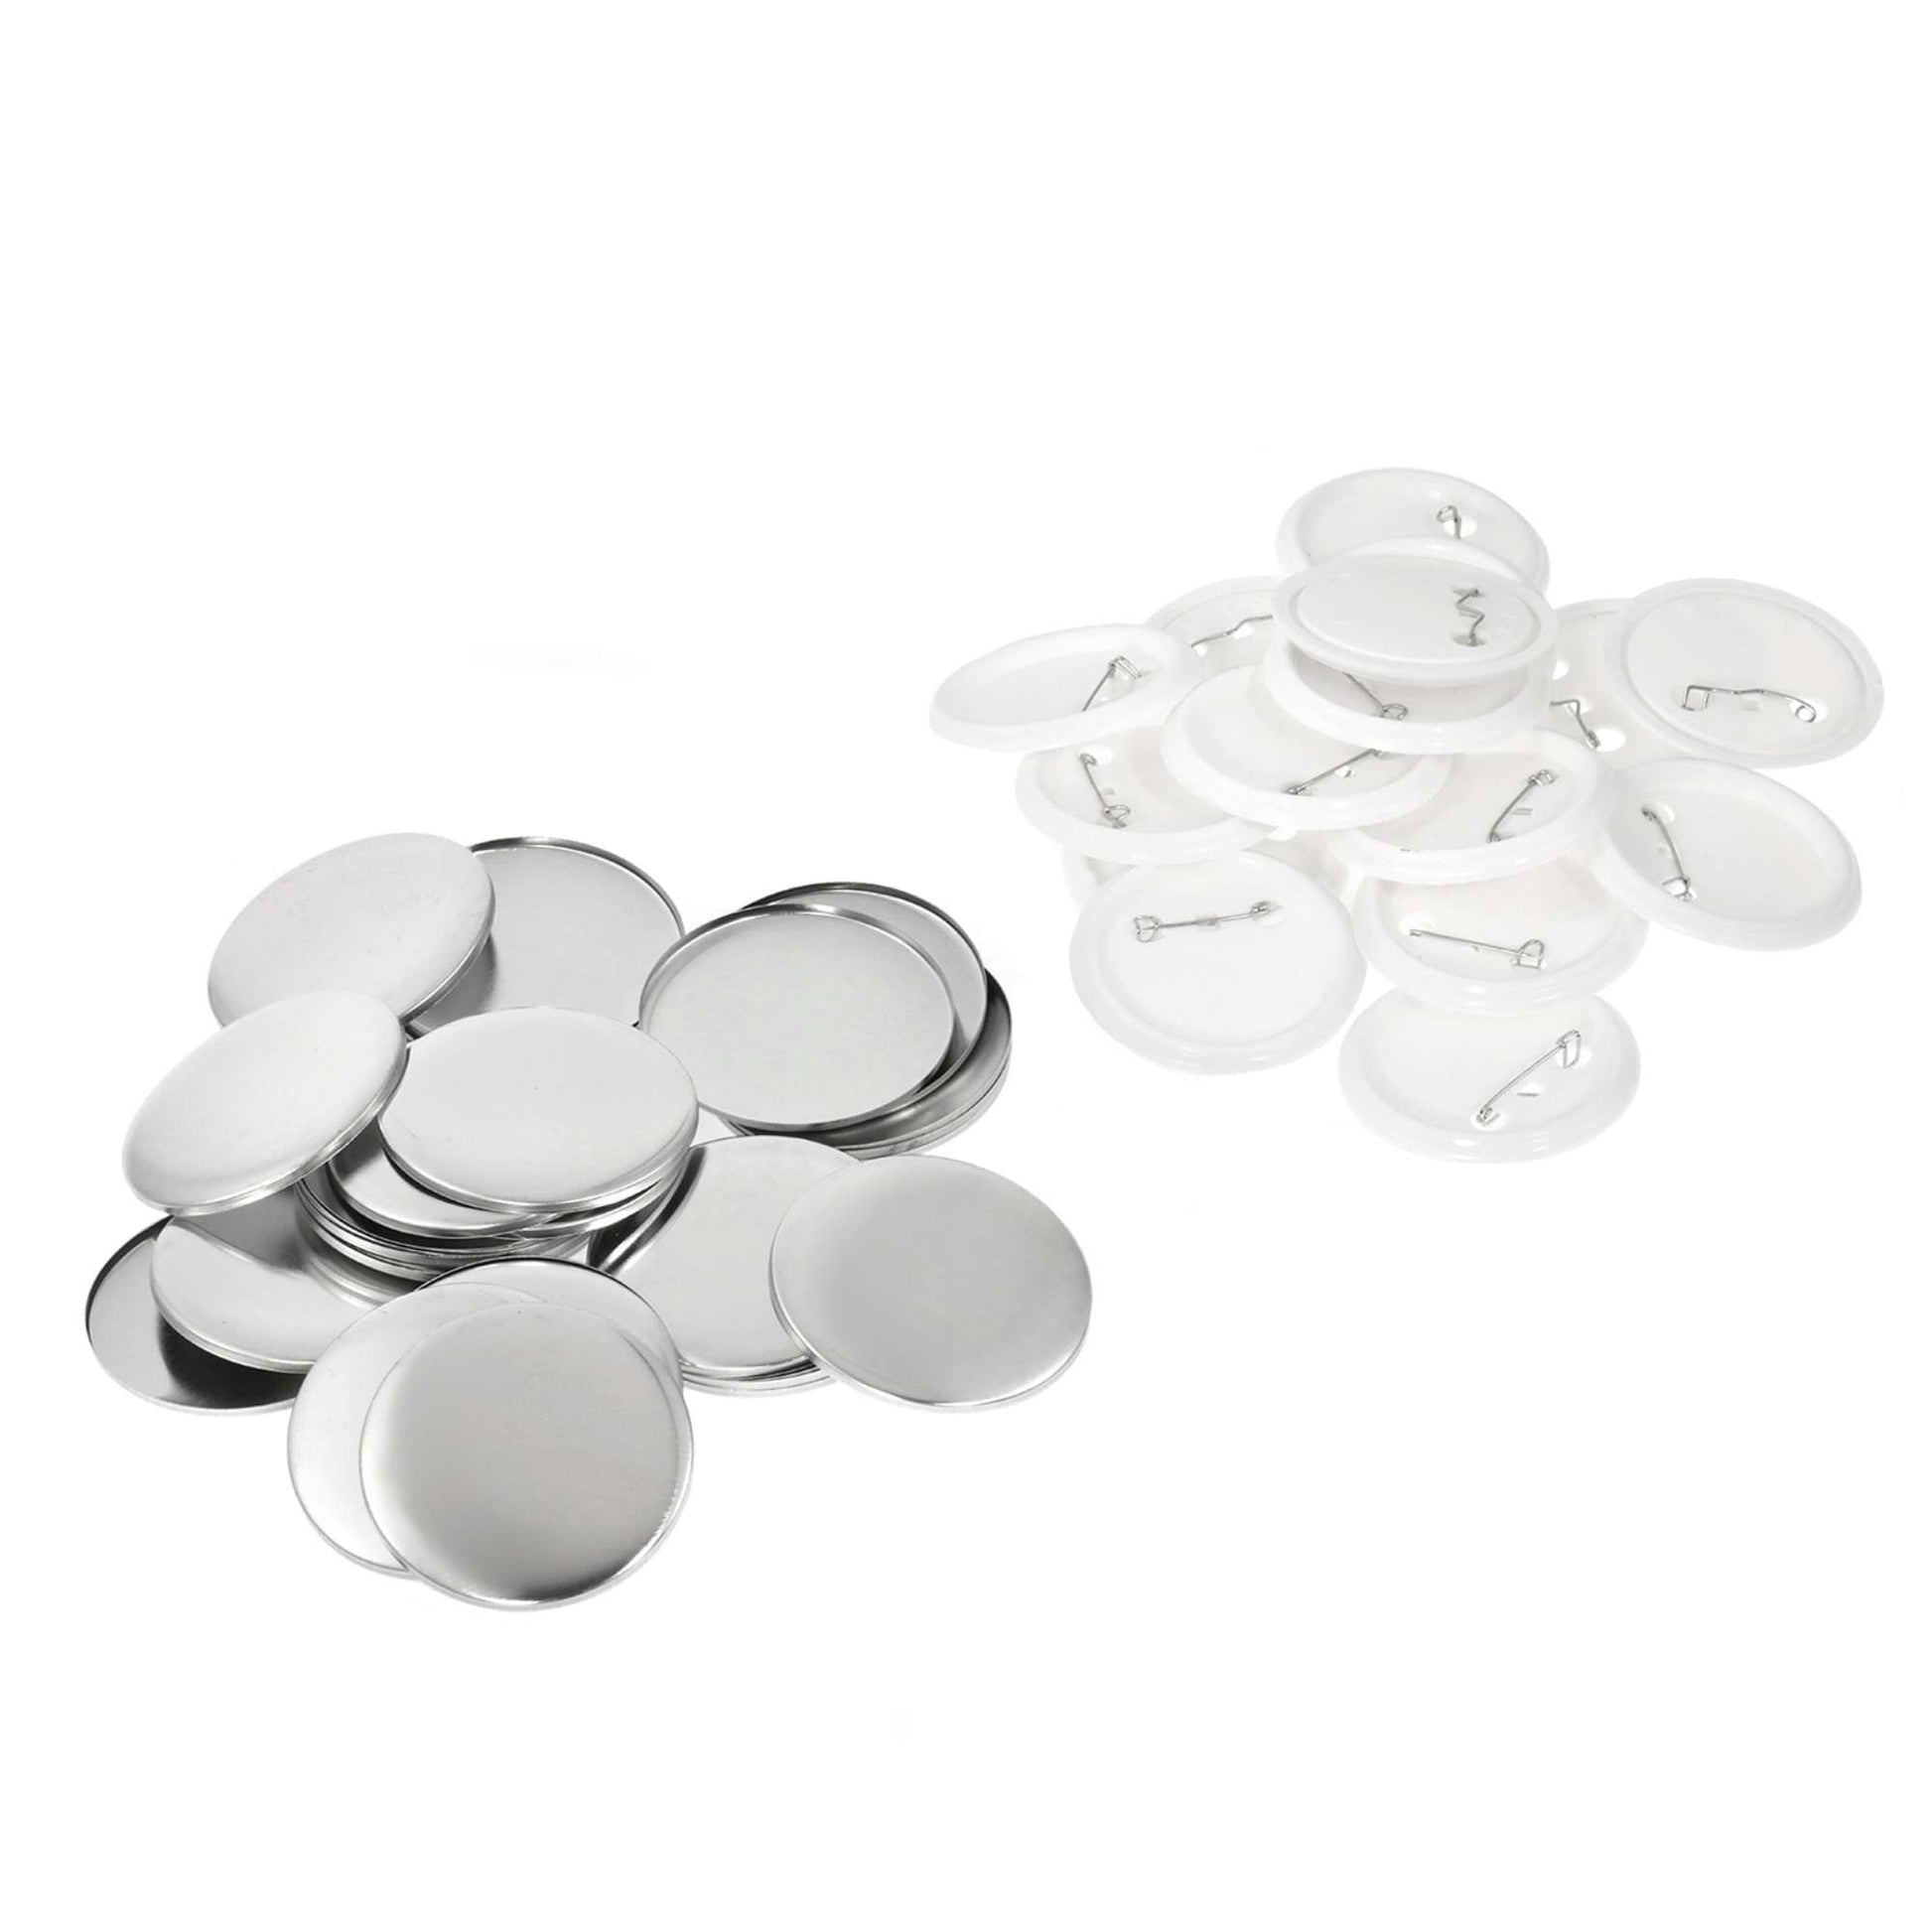 500x Button Badges 32mm - Craft DIY Hobby Accessory Making